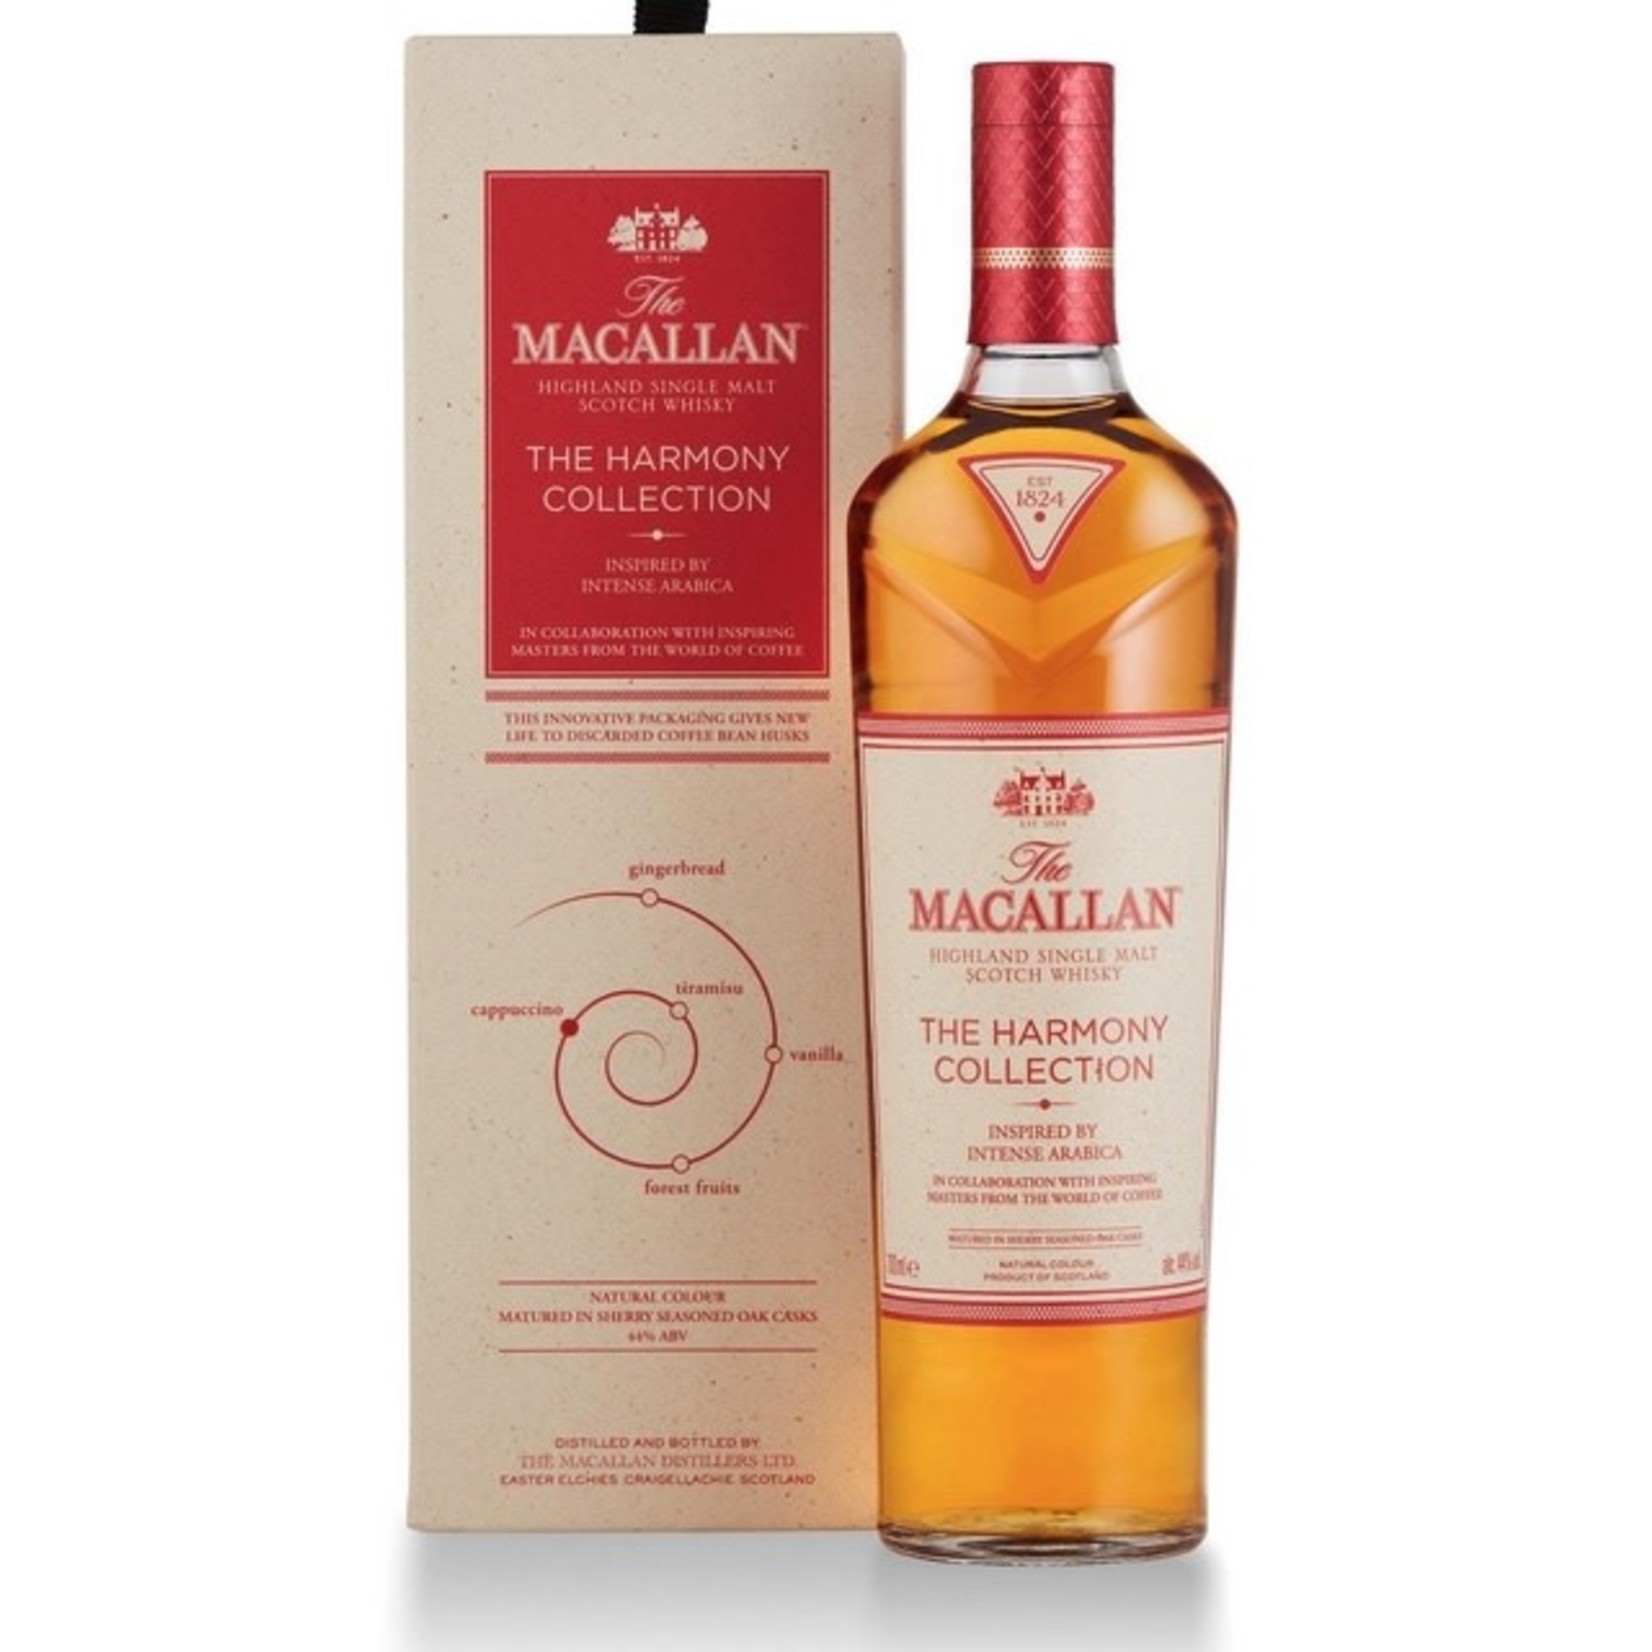 Spirits The Macallan The Harmony Collection Single Malt Scotch Ispired by Intense Arabica